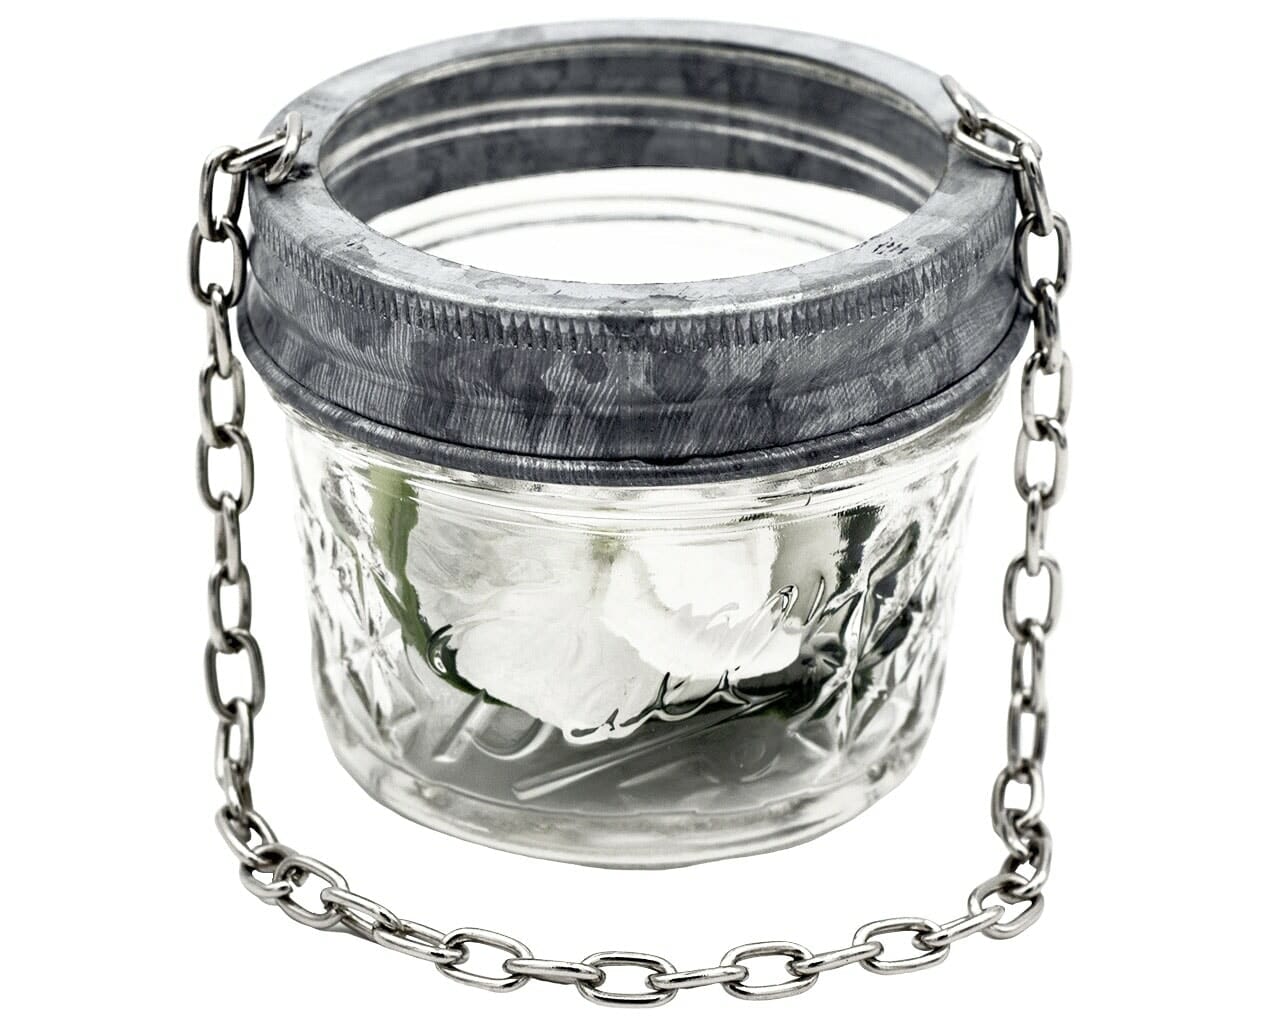 Galvanized Metal Band with Chain for Regular Mouth Mason Jars